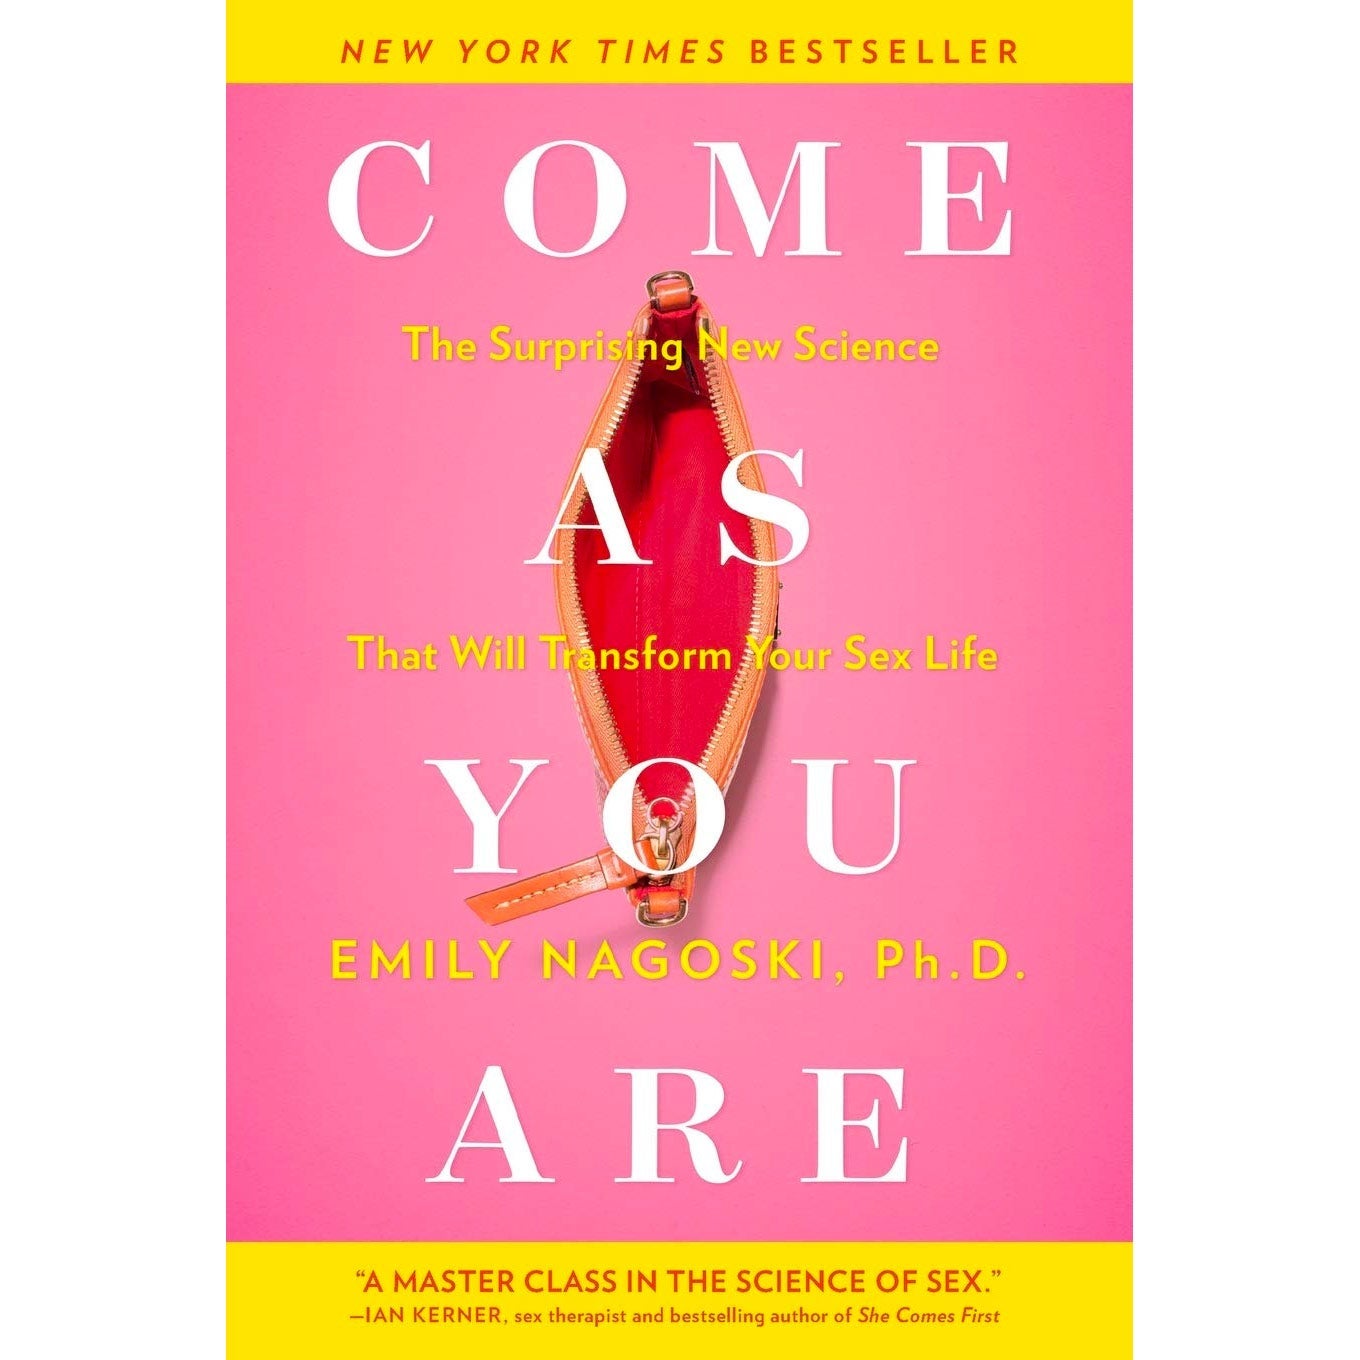 The cover of Come as You Are.